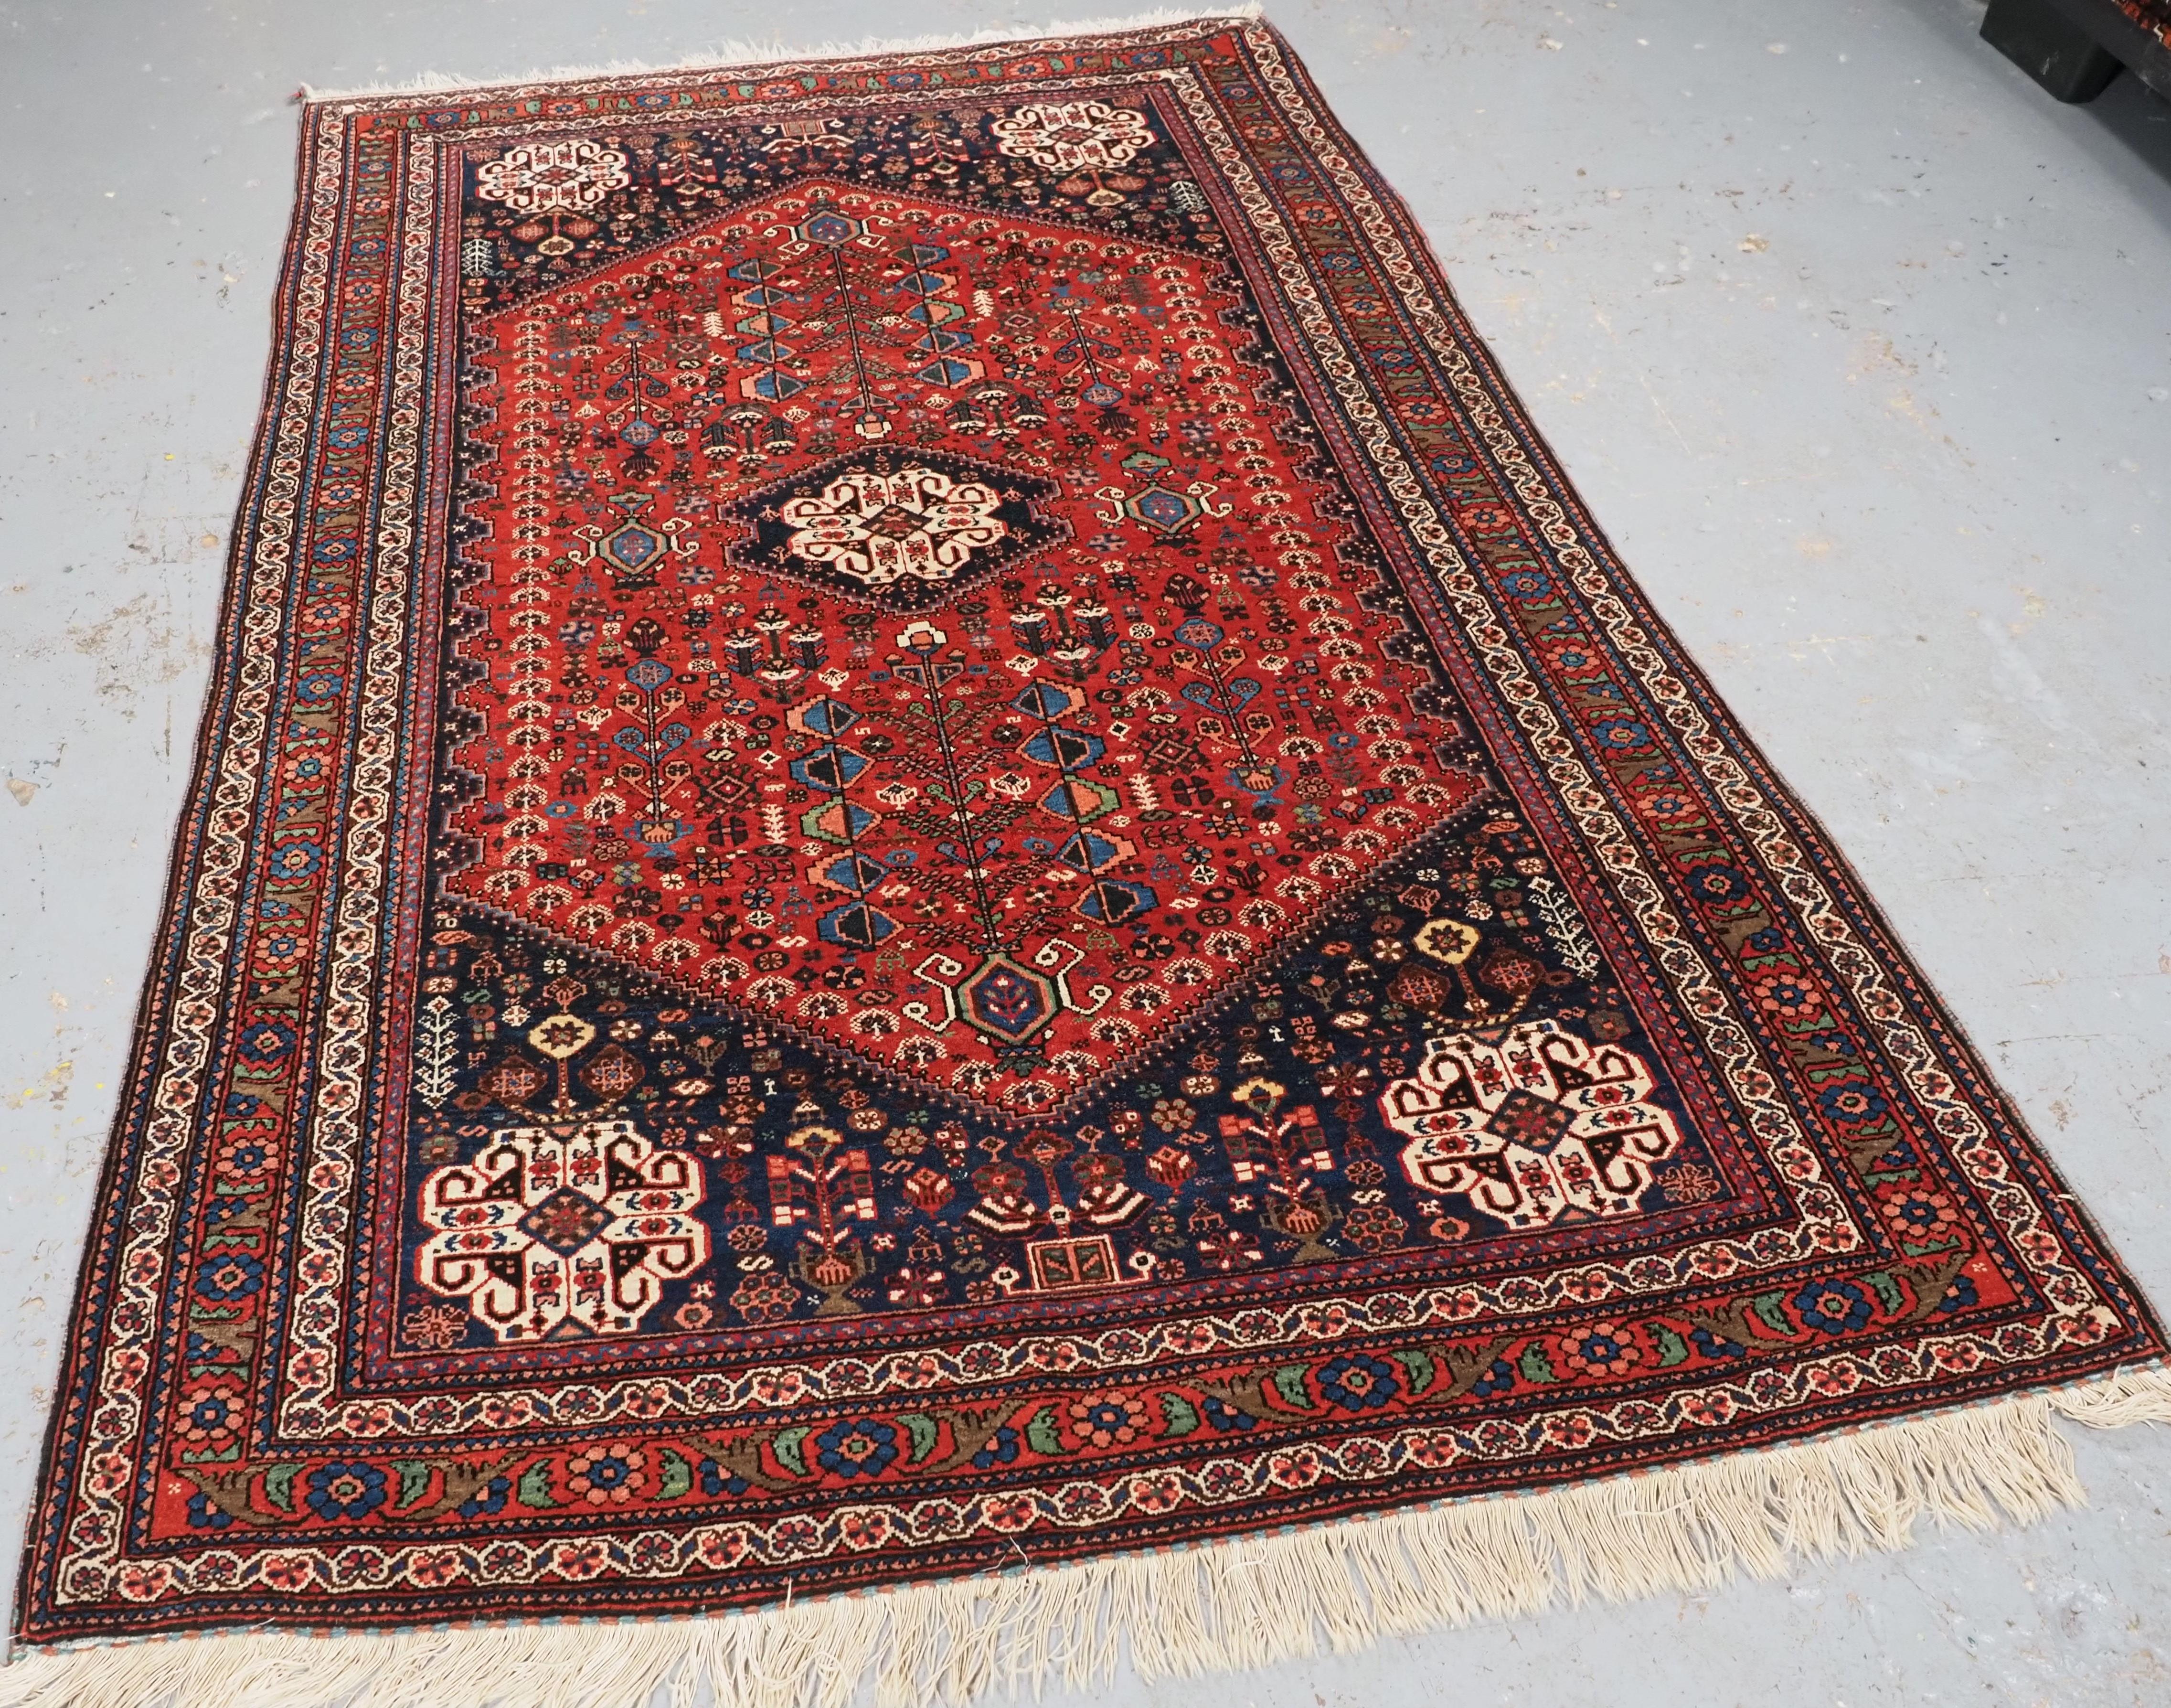 Size: 6ft 9in x 4ft 8in (206 x 141cm).

Antique Abedeh rug with the tribal medallion design.

Circa 1900/20.

The rug is of a traditional tribal design with a small central medallion, repeated in each of the corners; the field is filled with tribal